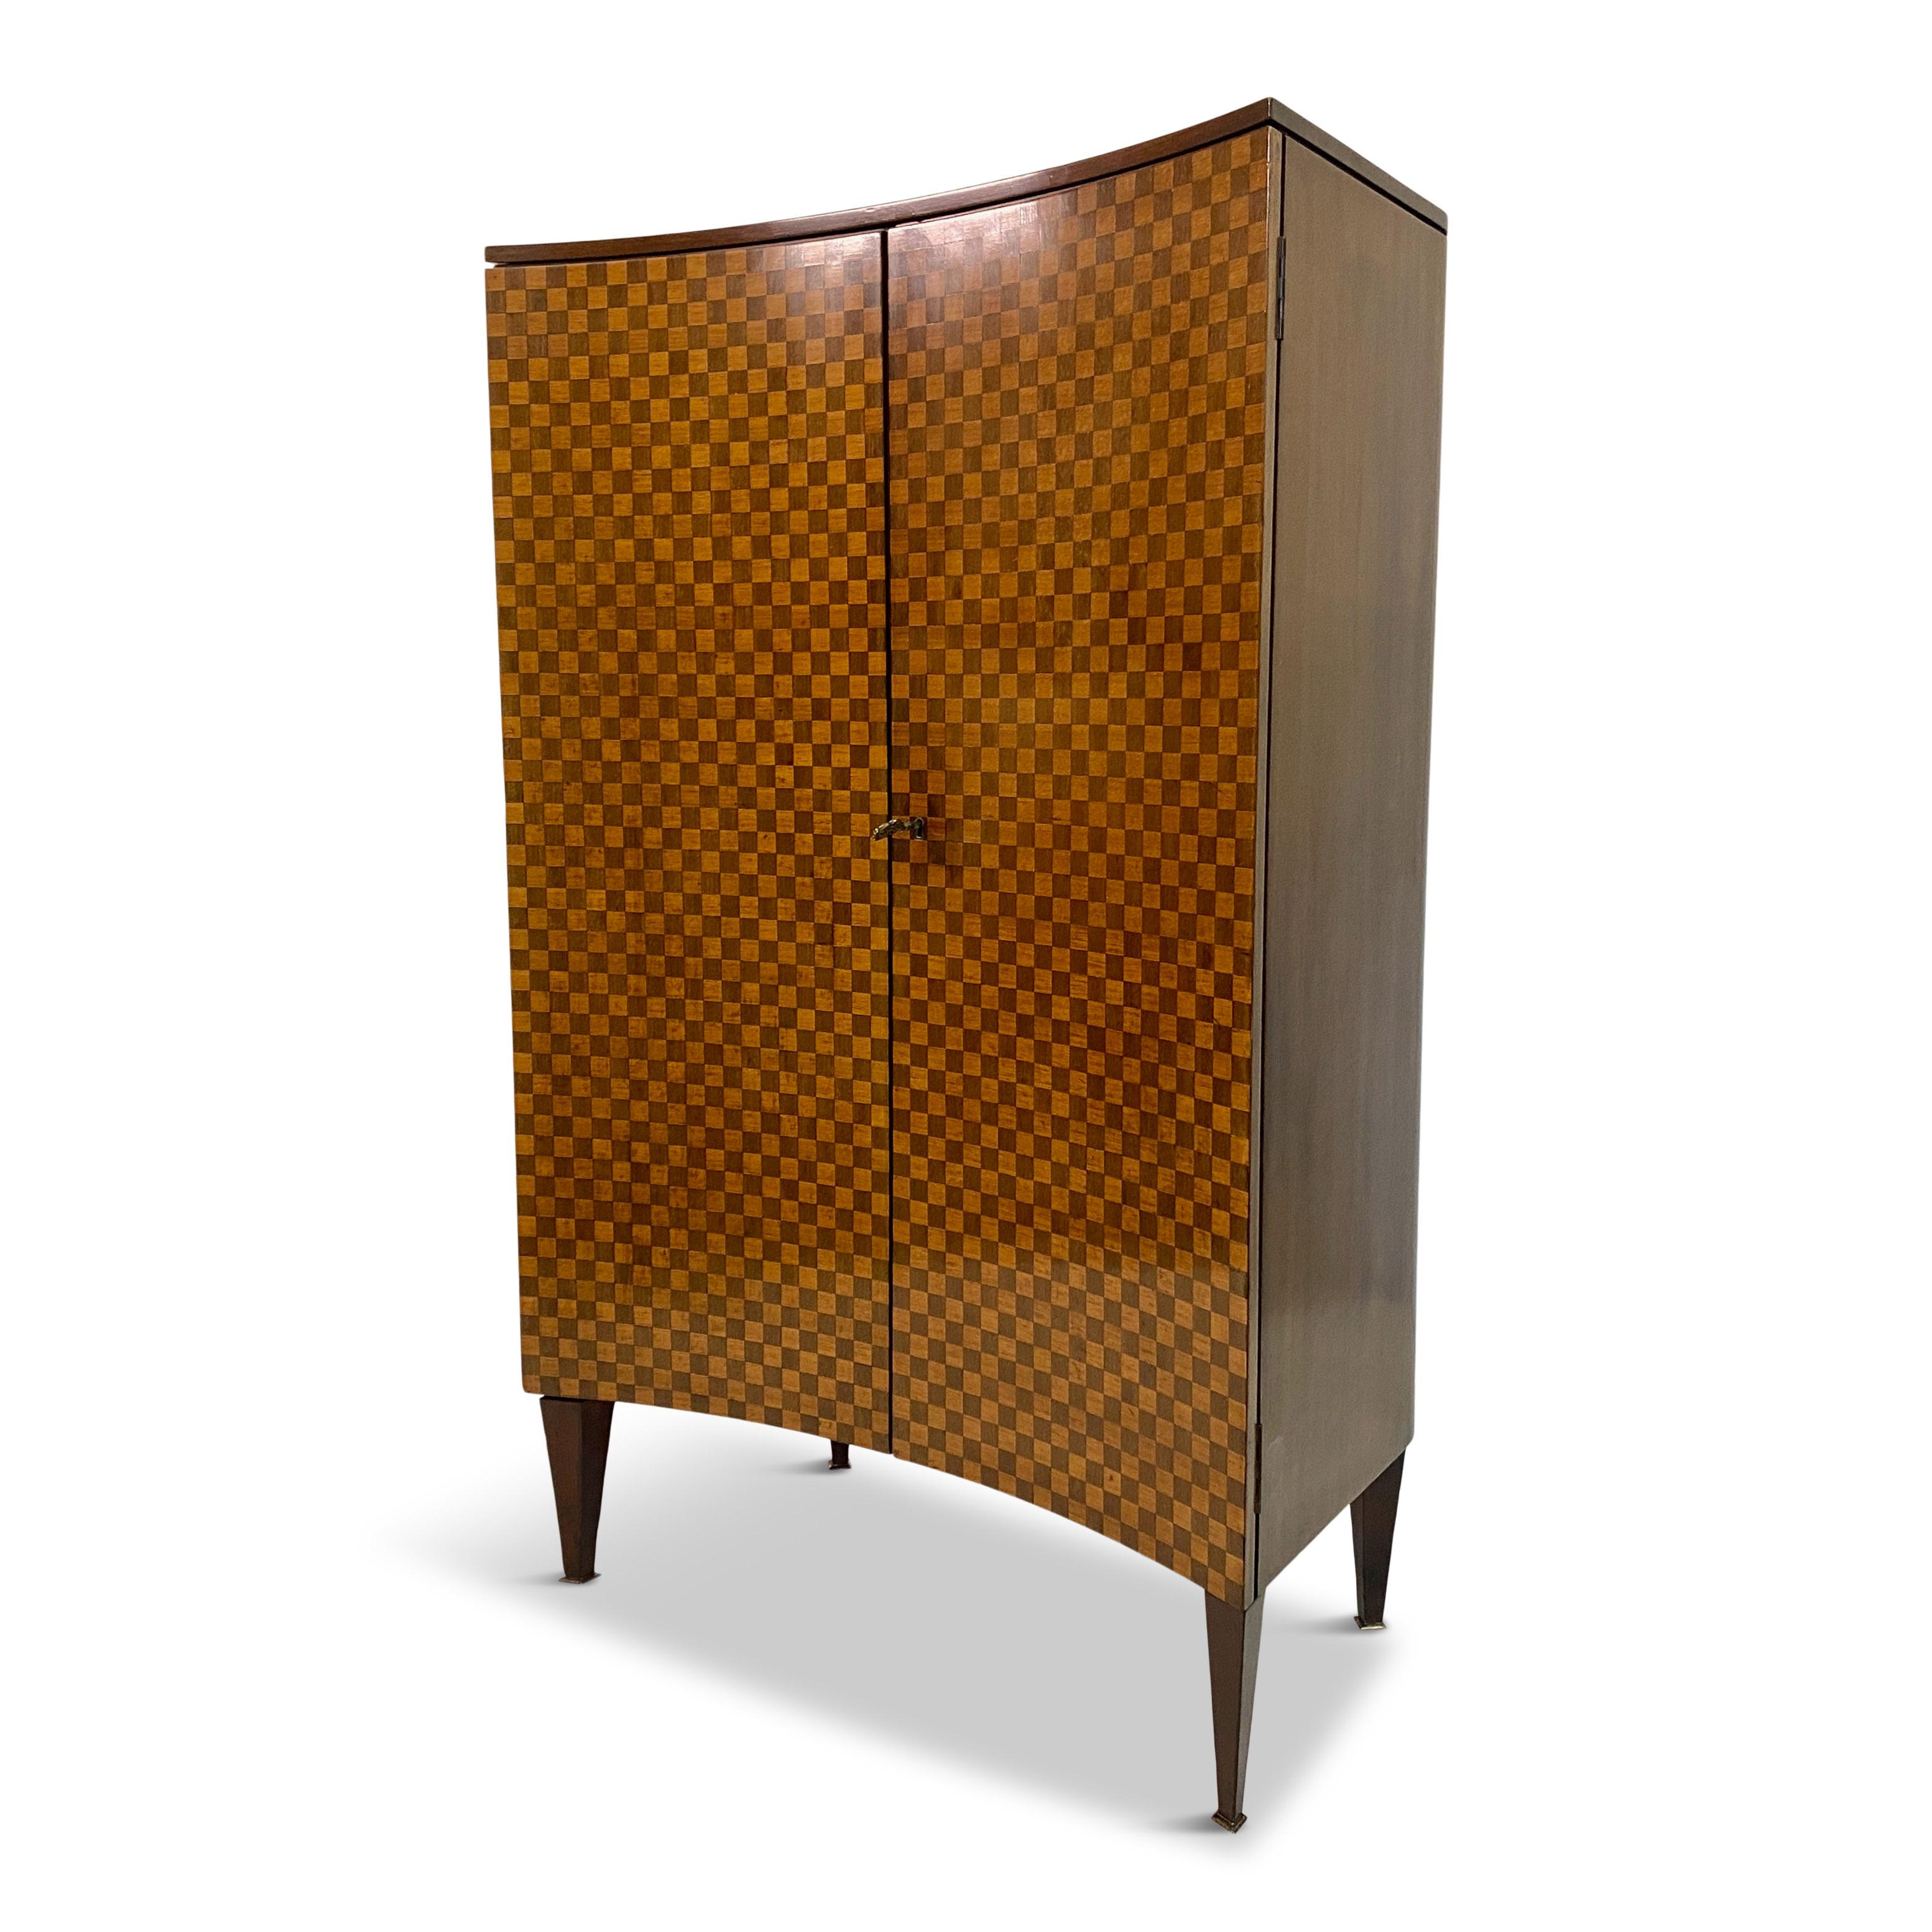 Drinks cabinet.

Chequerboard front consisting of alternating maple and ebony squares showing an amazing amount of work, skill and quality.

Brass quadrilateral feet.

Finished curved back.

Two glass shelves and one pull out glass shelf with brass